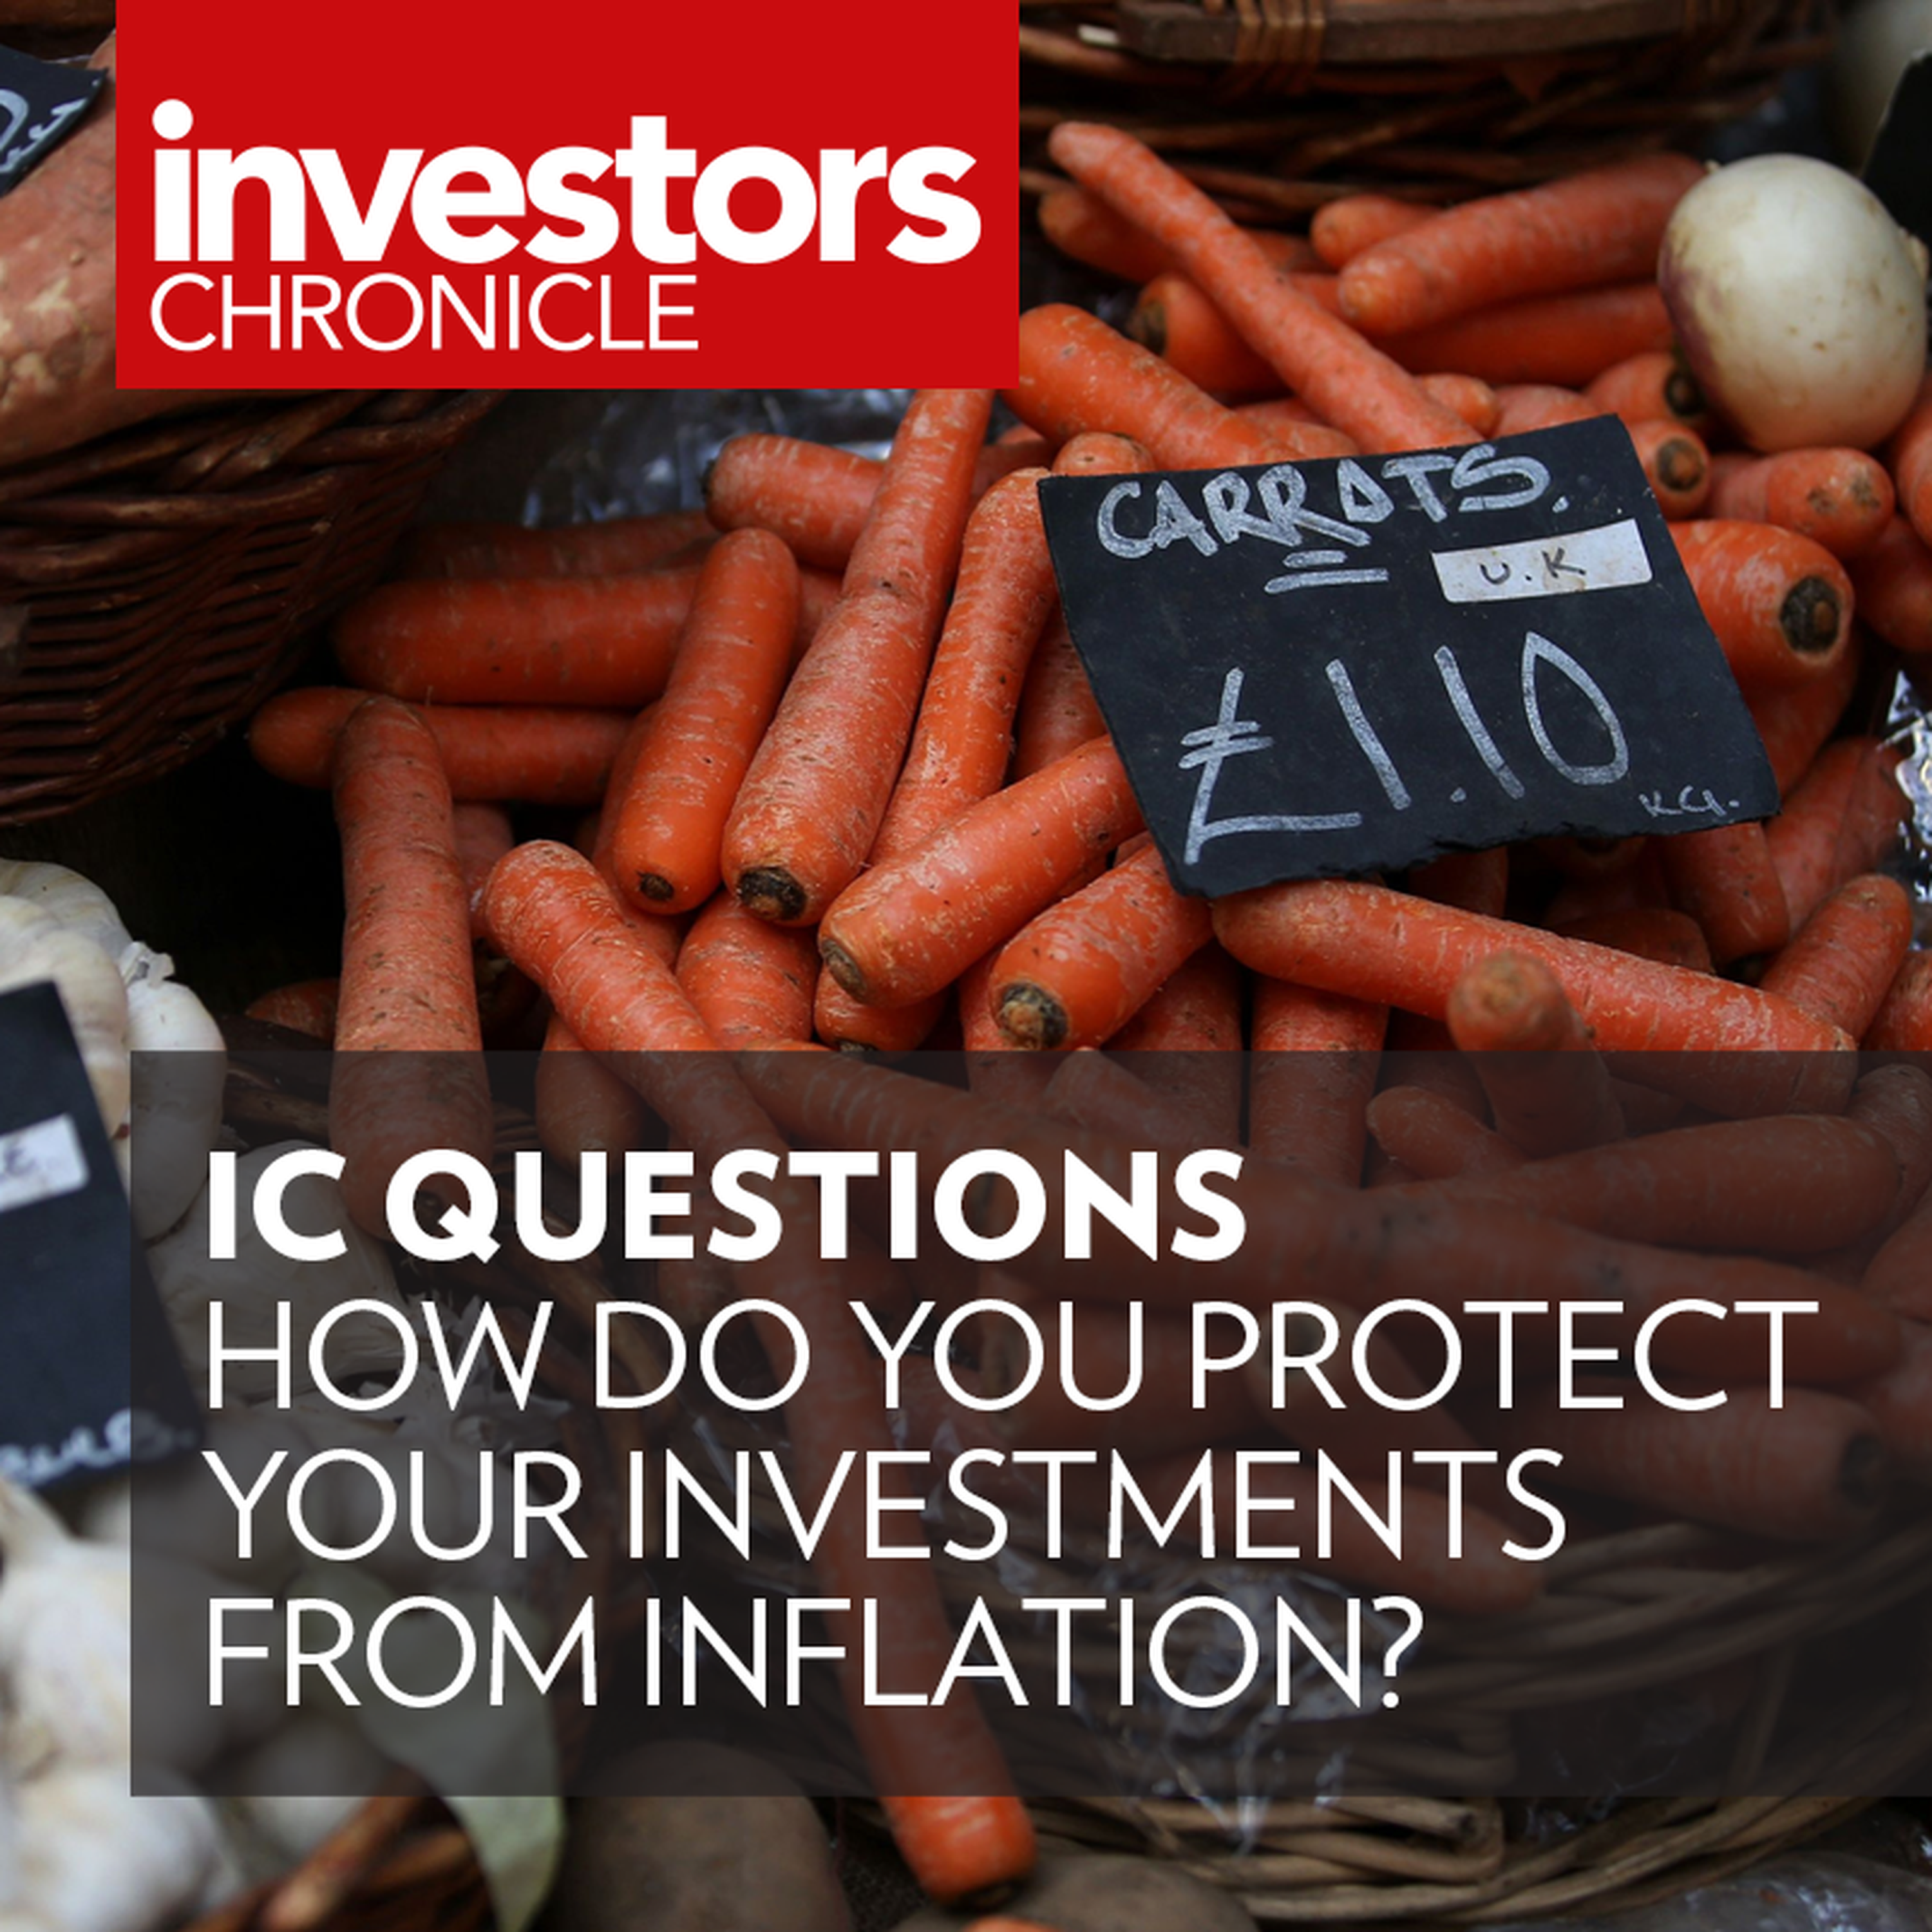 IC Questions: How do you protect your investments from inflation?